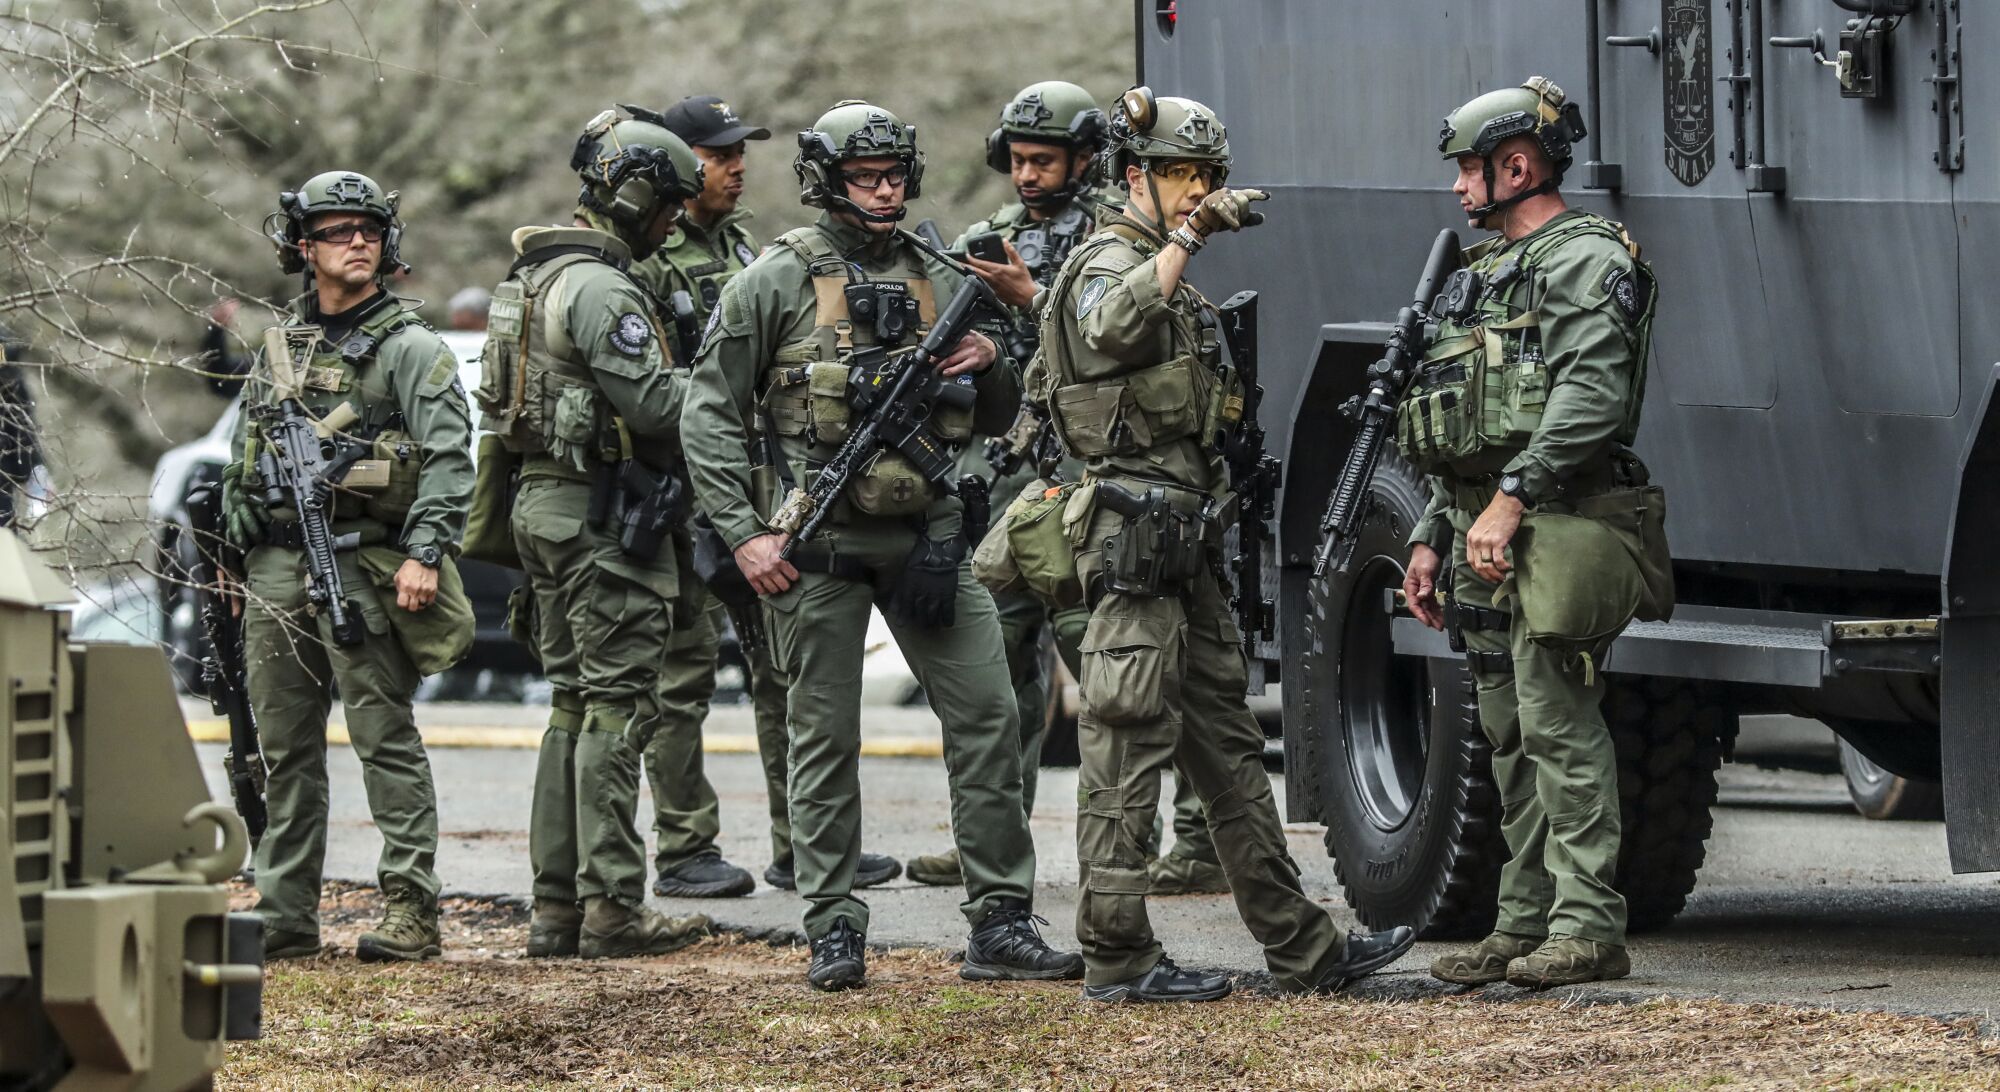 SWAT members are pictured leaving the Gresham Park command post in Atlanta after conducting a "clearing operation."